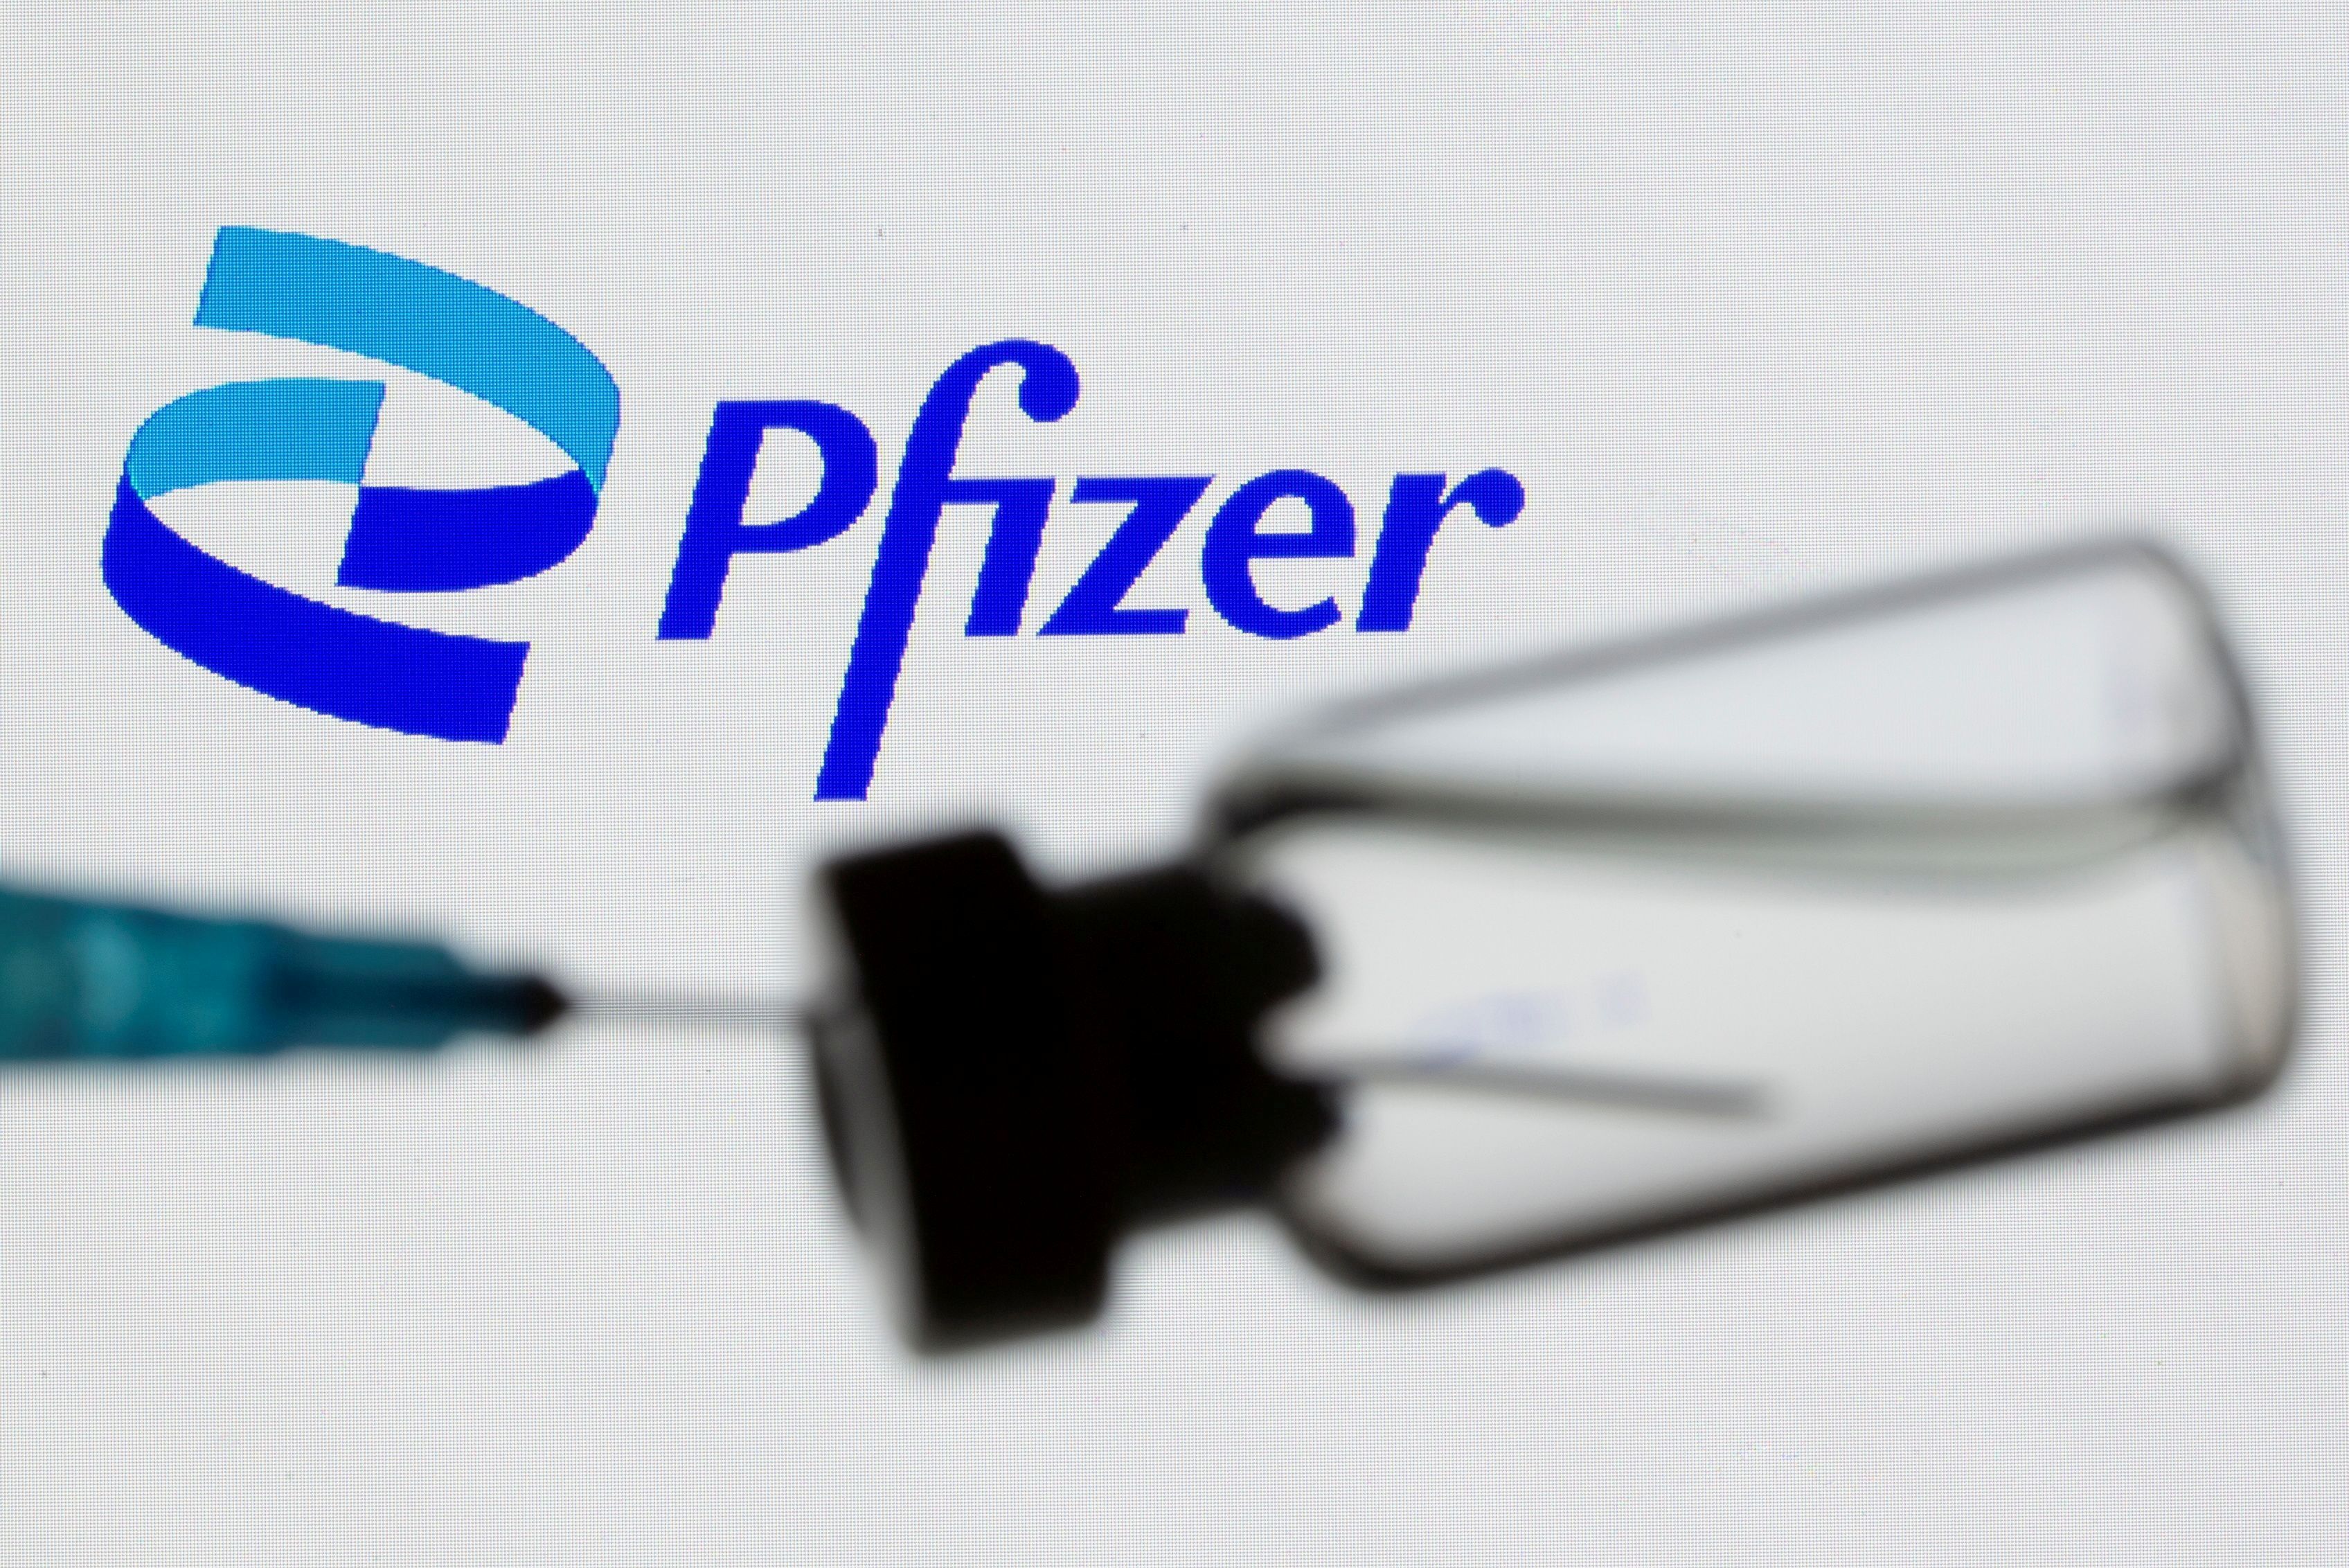 A syringe and vial are seen in front of a displayed Pfizer logo in this illustration